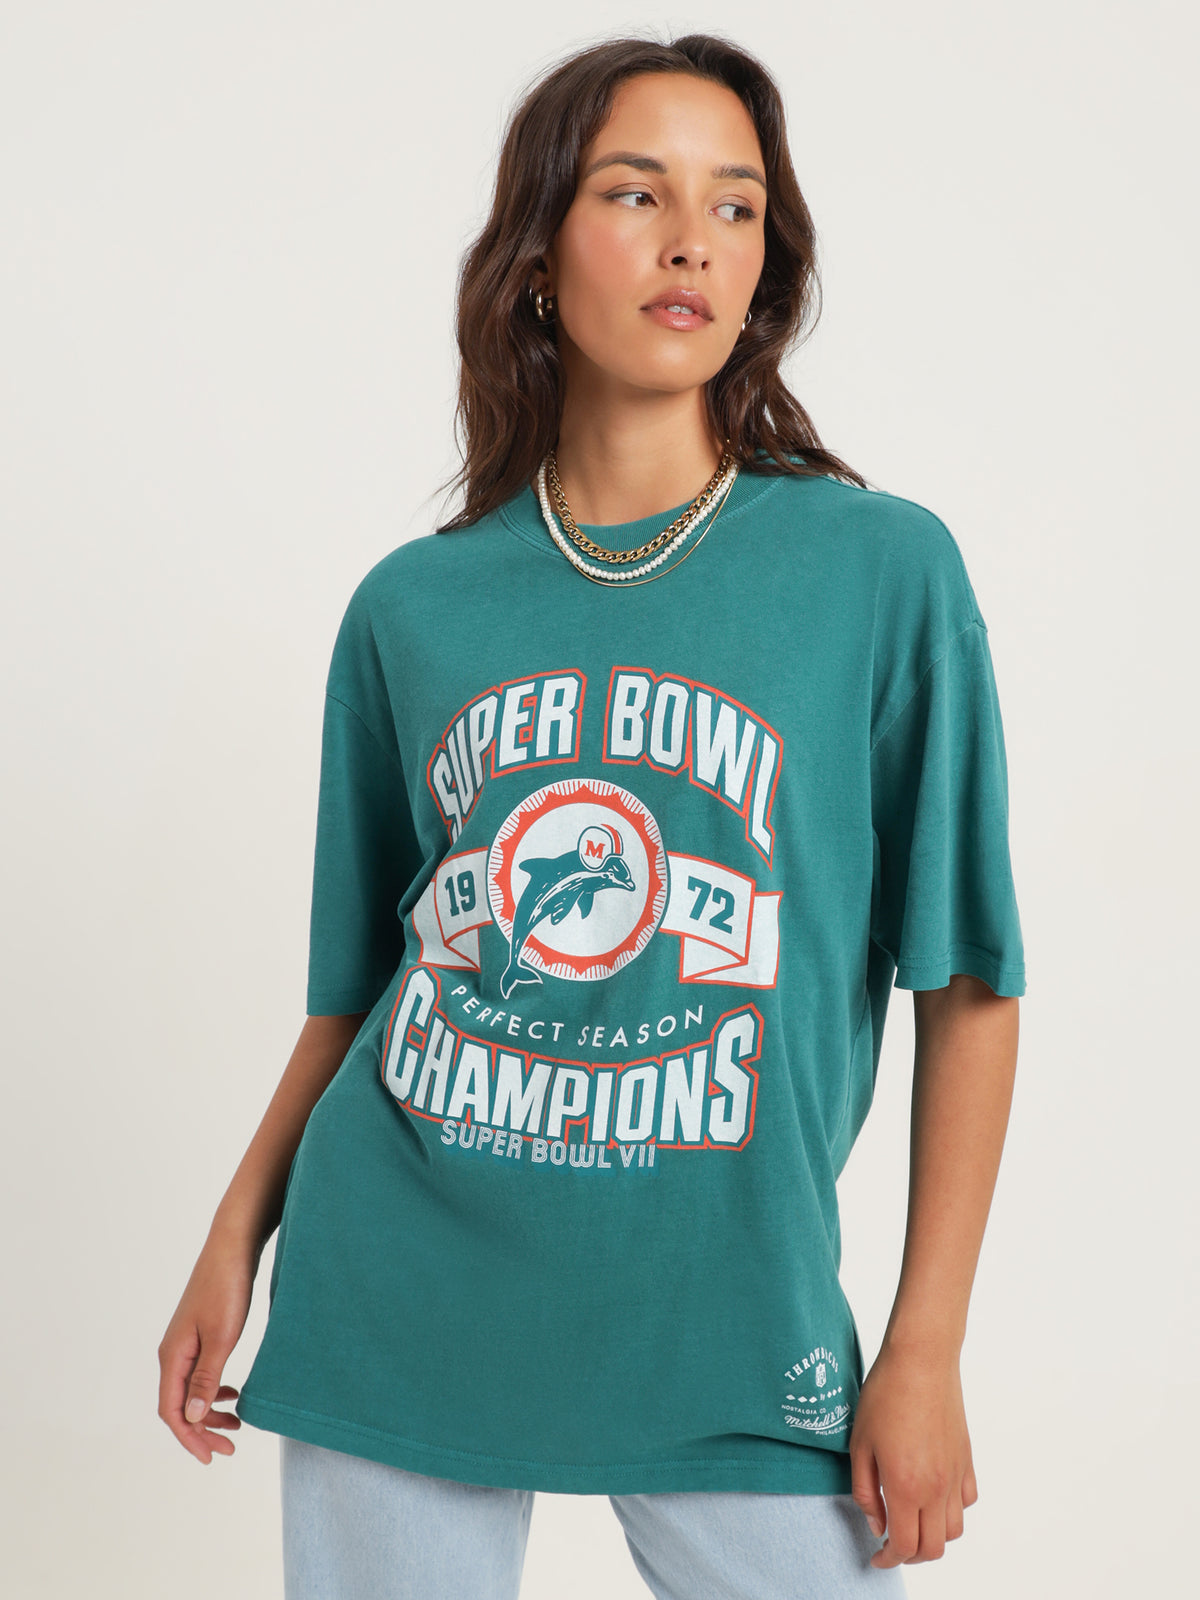 Perfect Season T-Shirt in Faded Teal